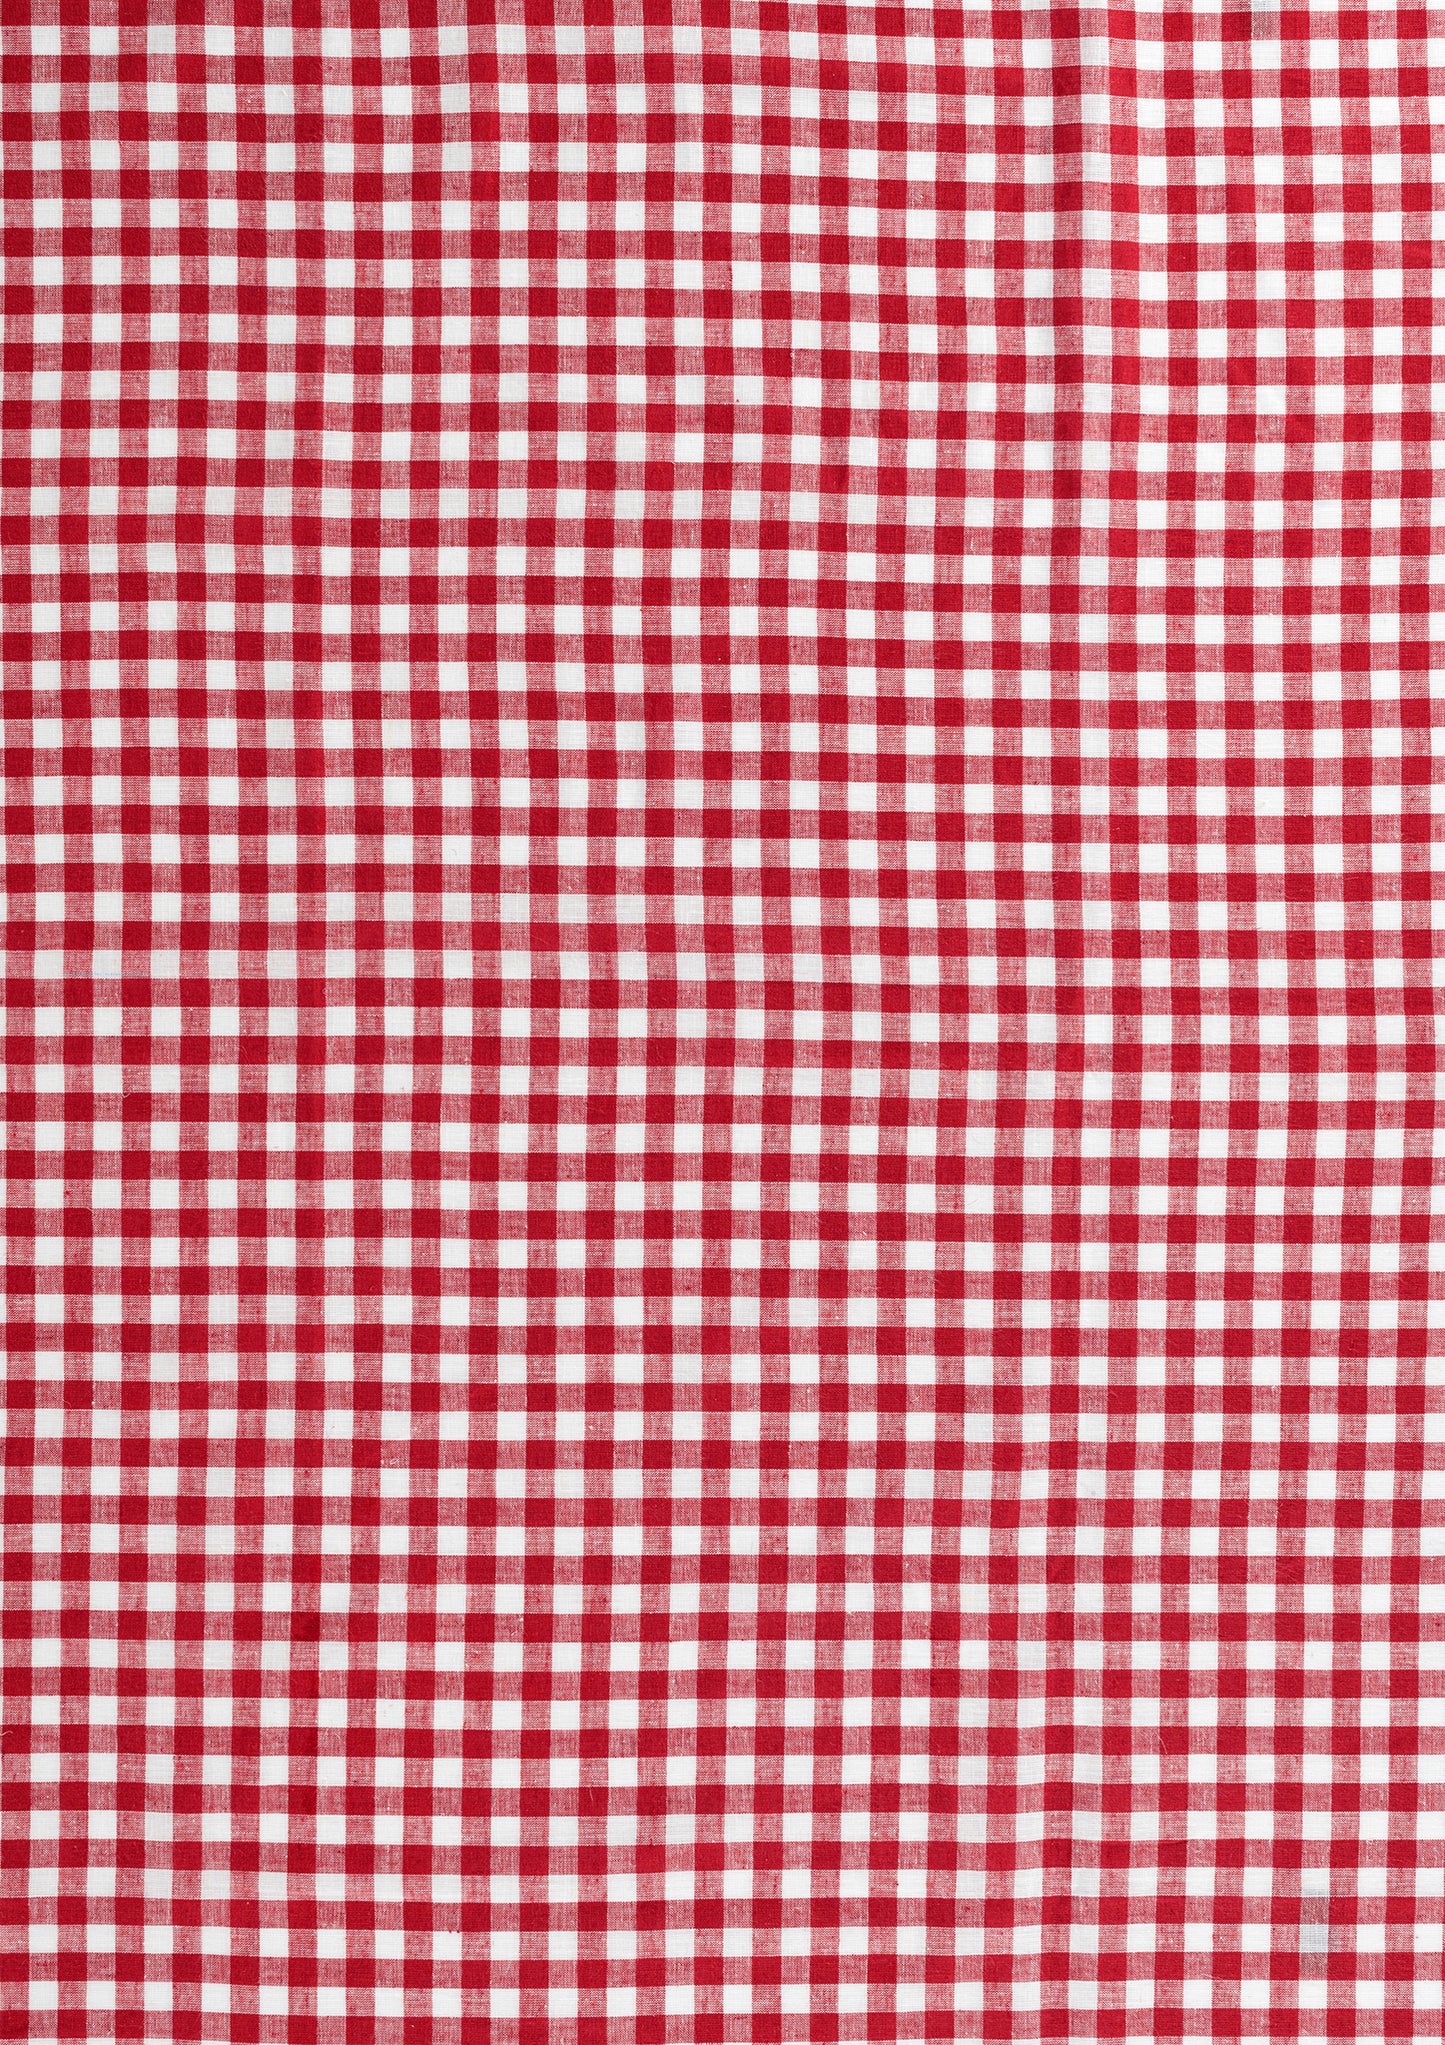 Red and White A1 Photography Backdrop - Gingham Fabric